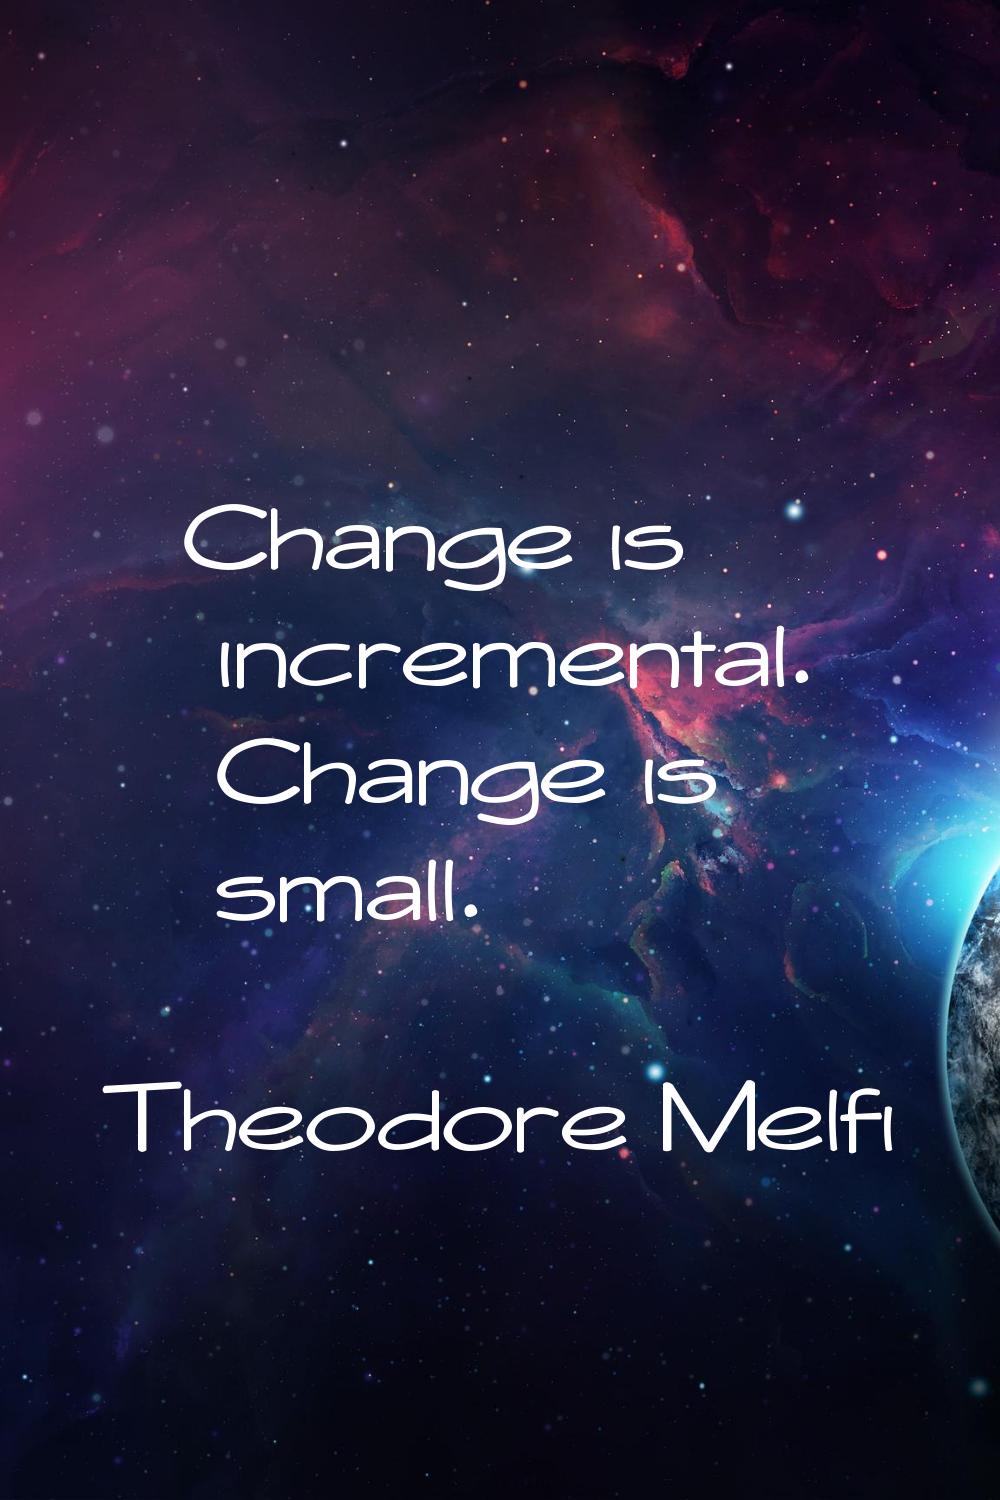 Change is incremental. Change is small.